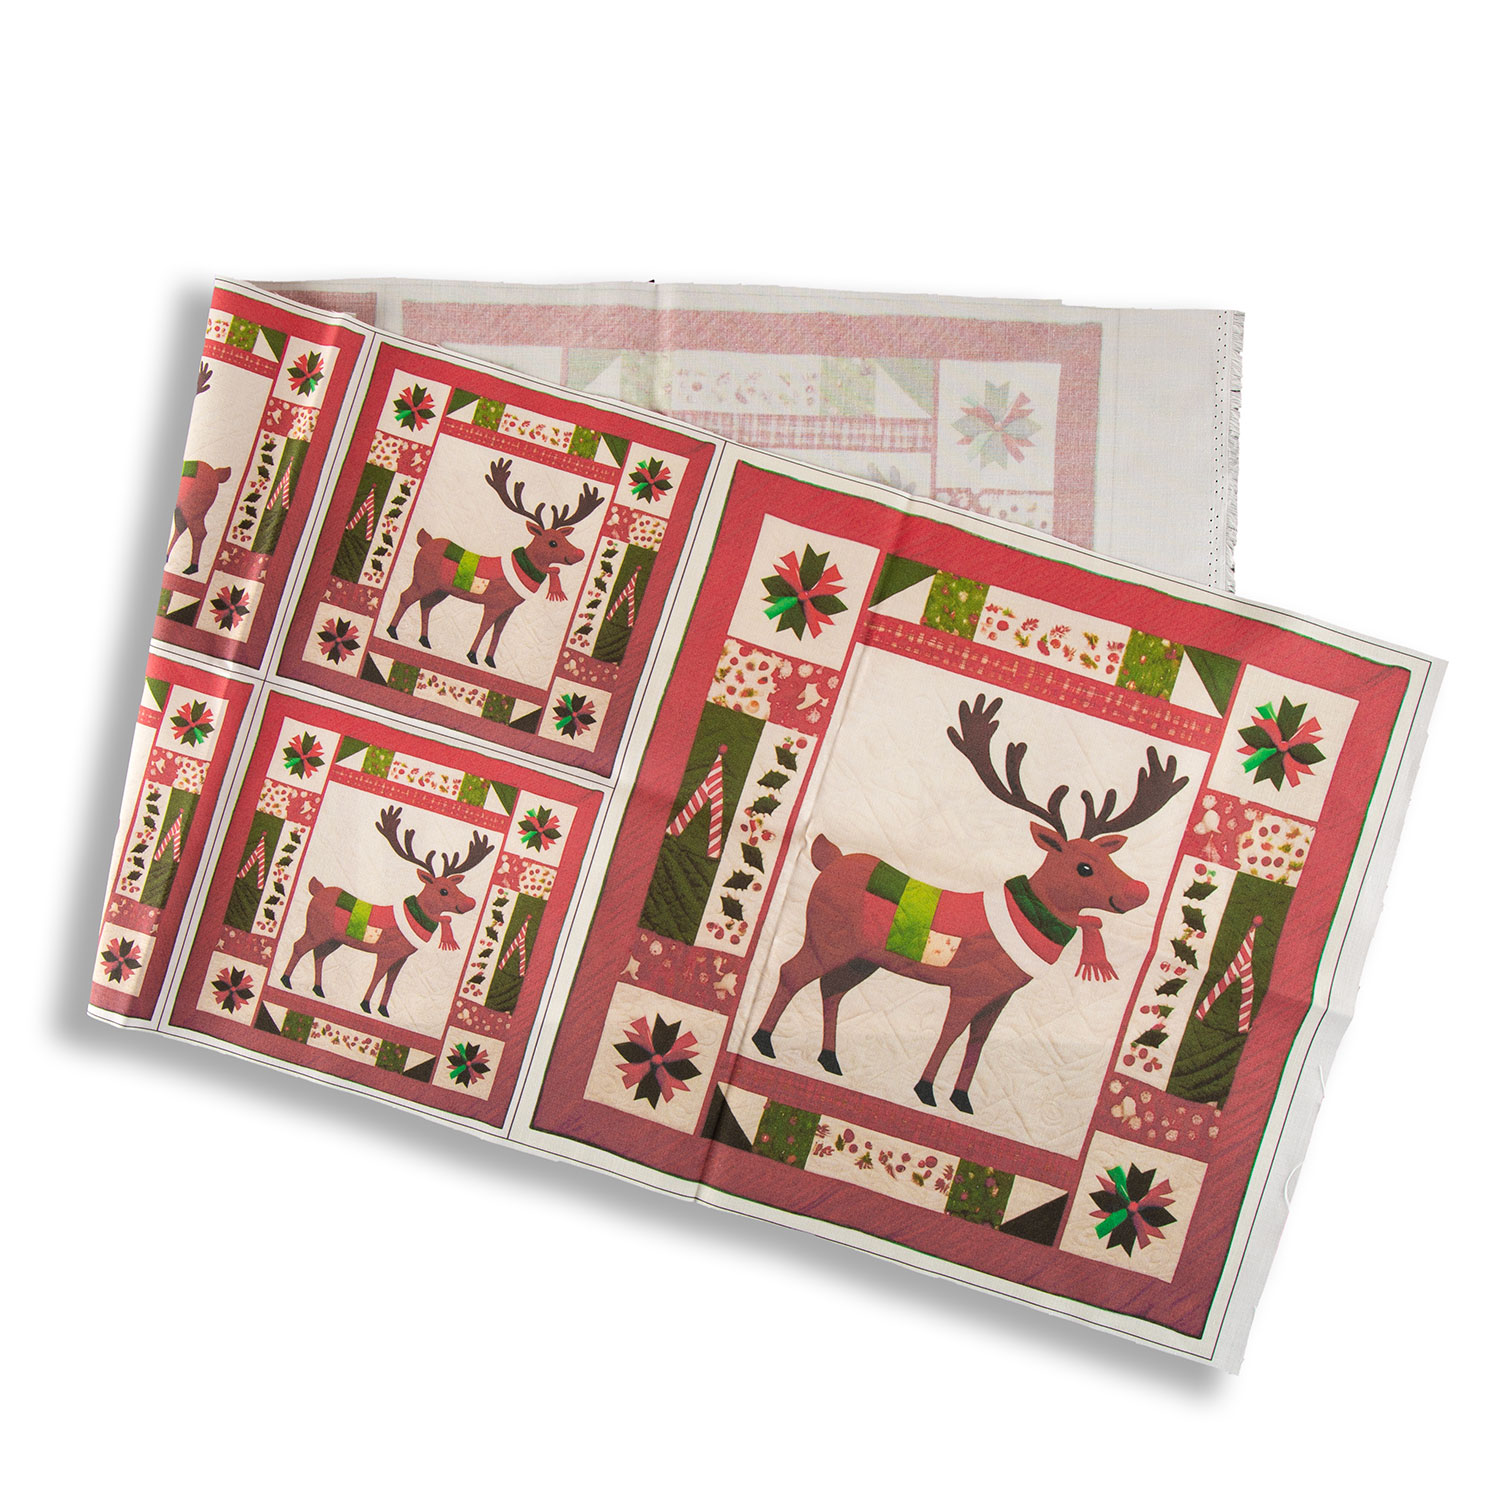 Craft Yourself Silly Festive Bag & Cushion Panels - 2 x 13.5" Panels & 4x 6" Panels - Pick N Mix - Choose Any 2 - Patchwork Reindeer